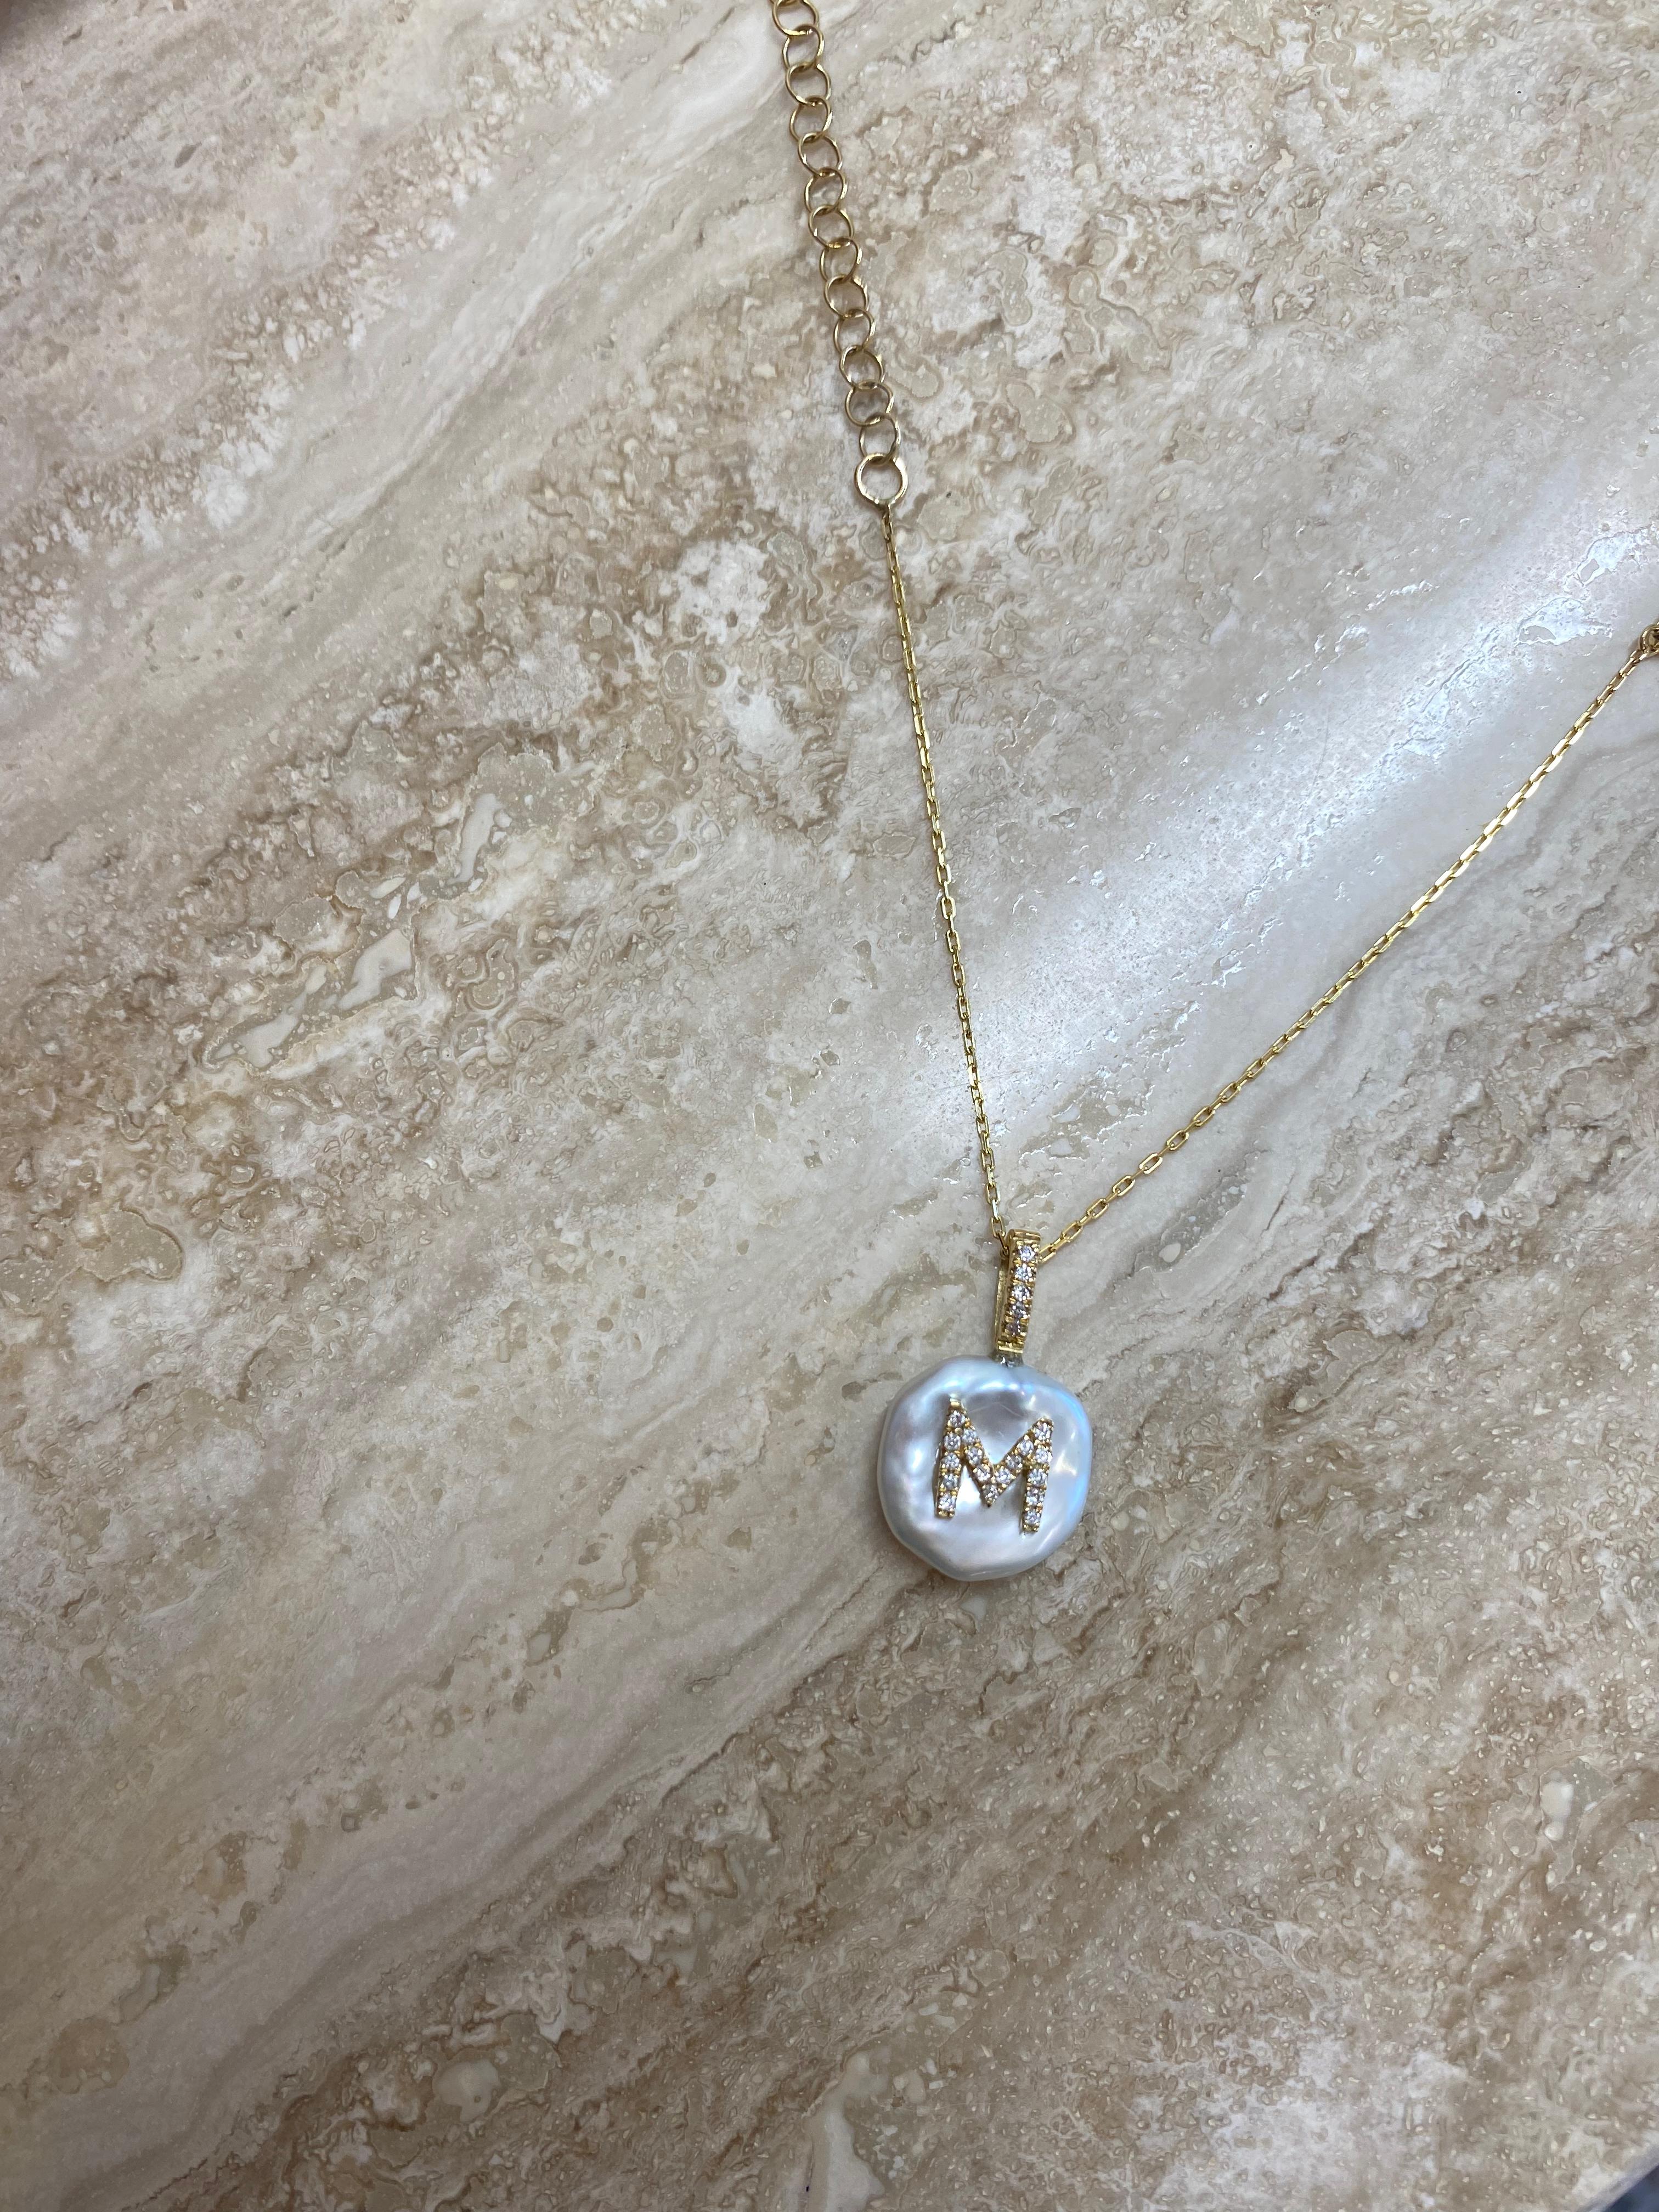 This unique pearl charm features the letter M on a freshwater keshi pearl. The initial is casted from 18Karat Yellow Gold and set with natural glimmering diamonds. 

The pearl is handpicked for its luster and one-of-a-kind beautiful appearance.